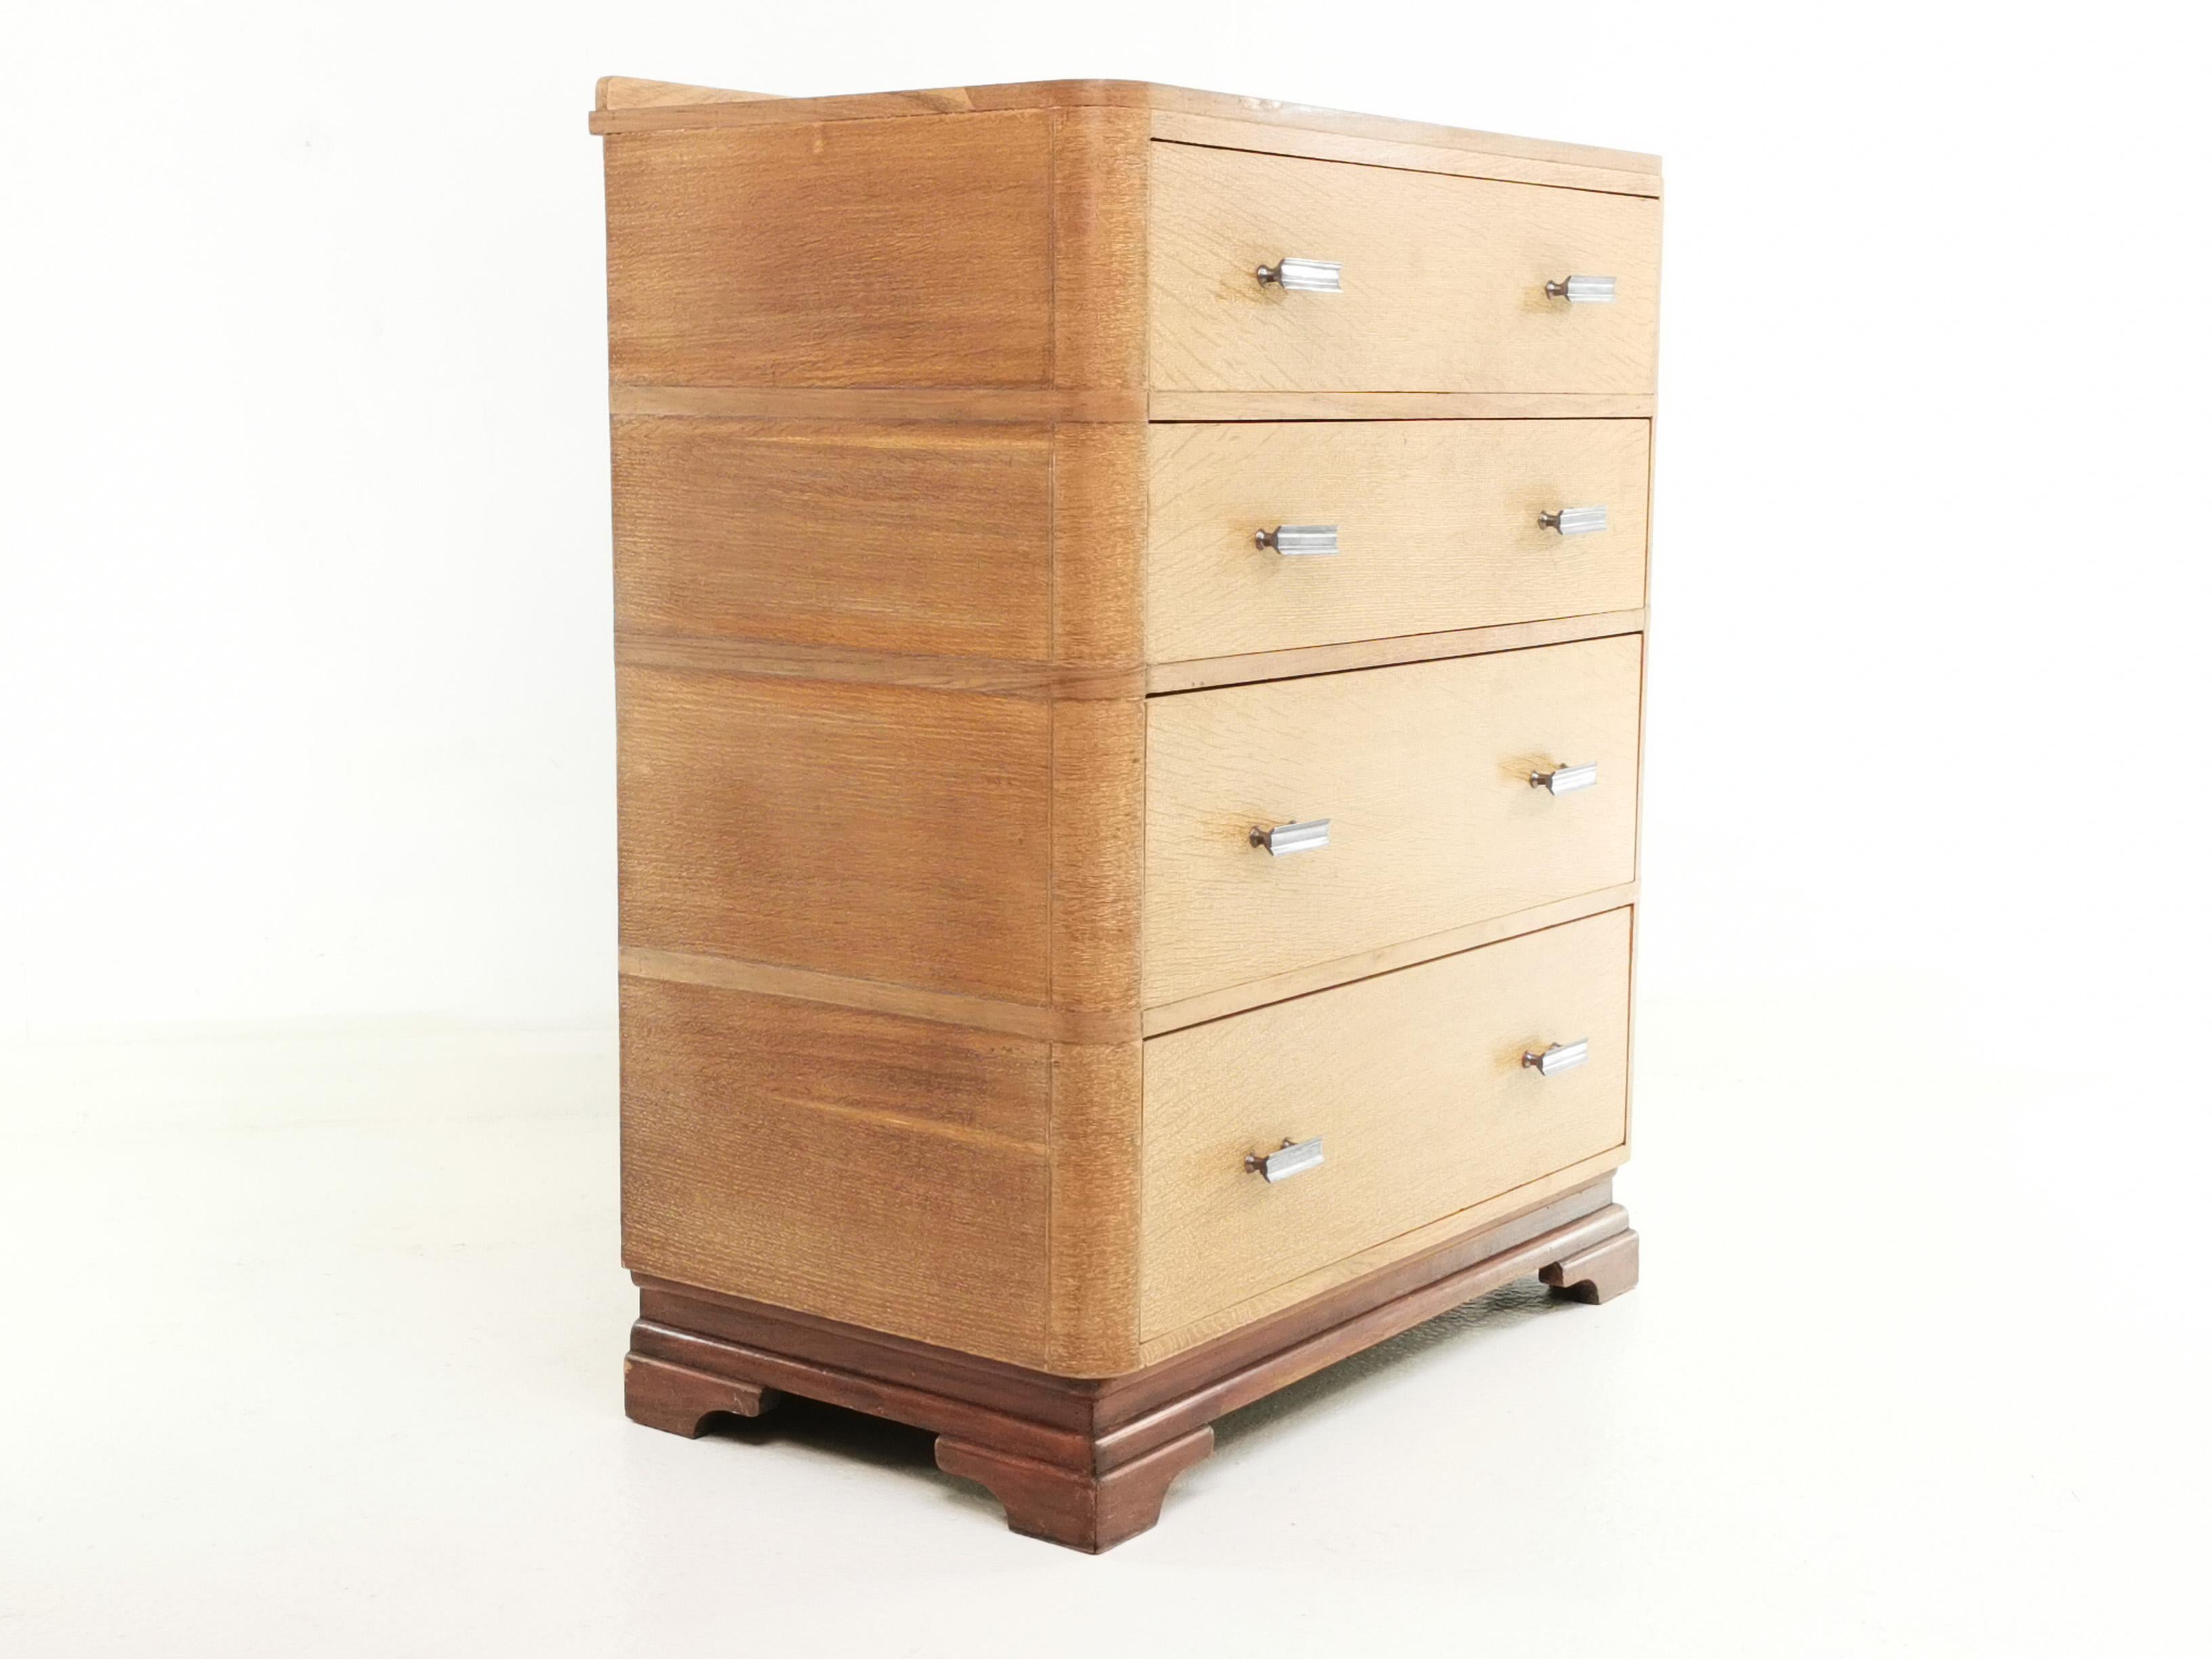 20th Century British Art Deco Chest of Drawers in Limed Oak, 1930s